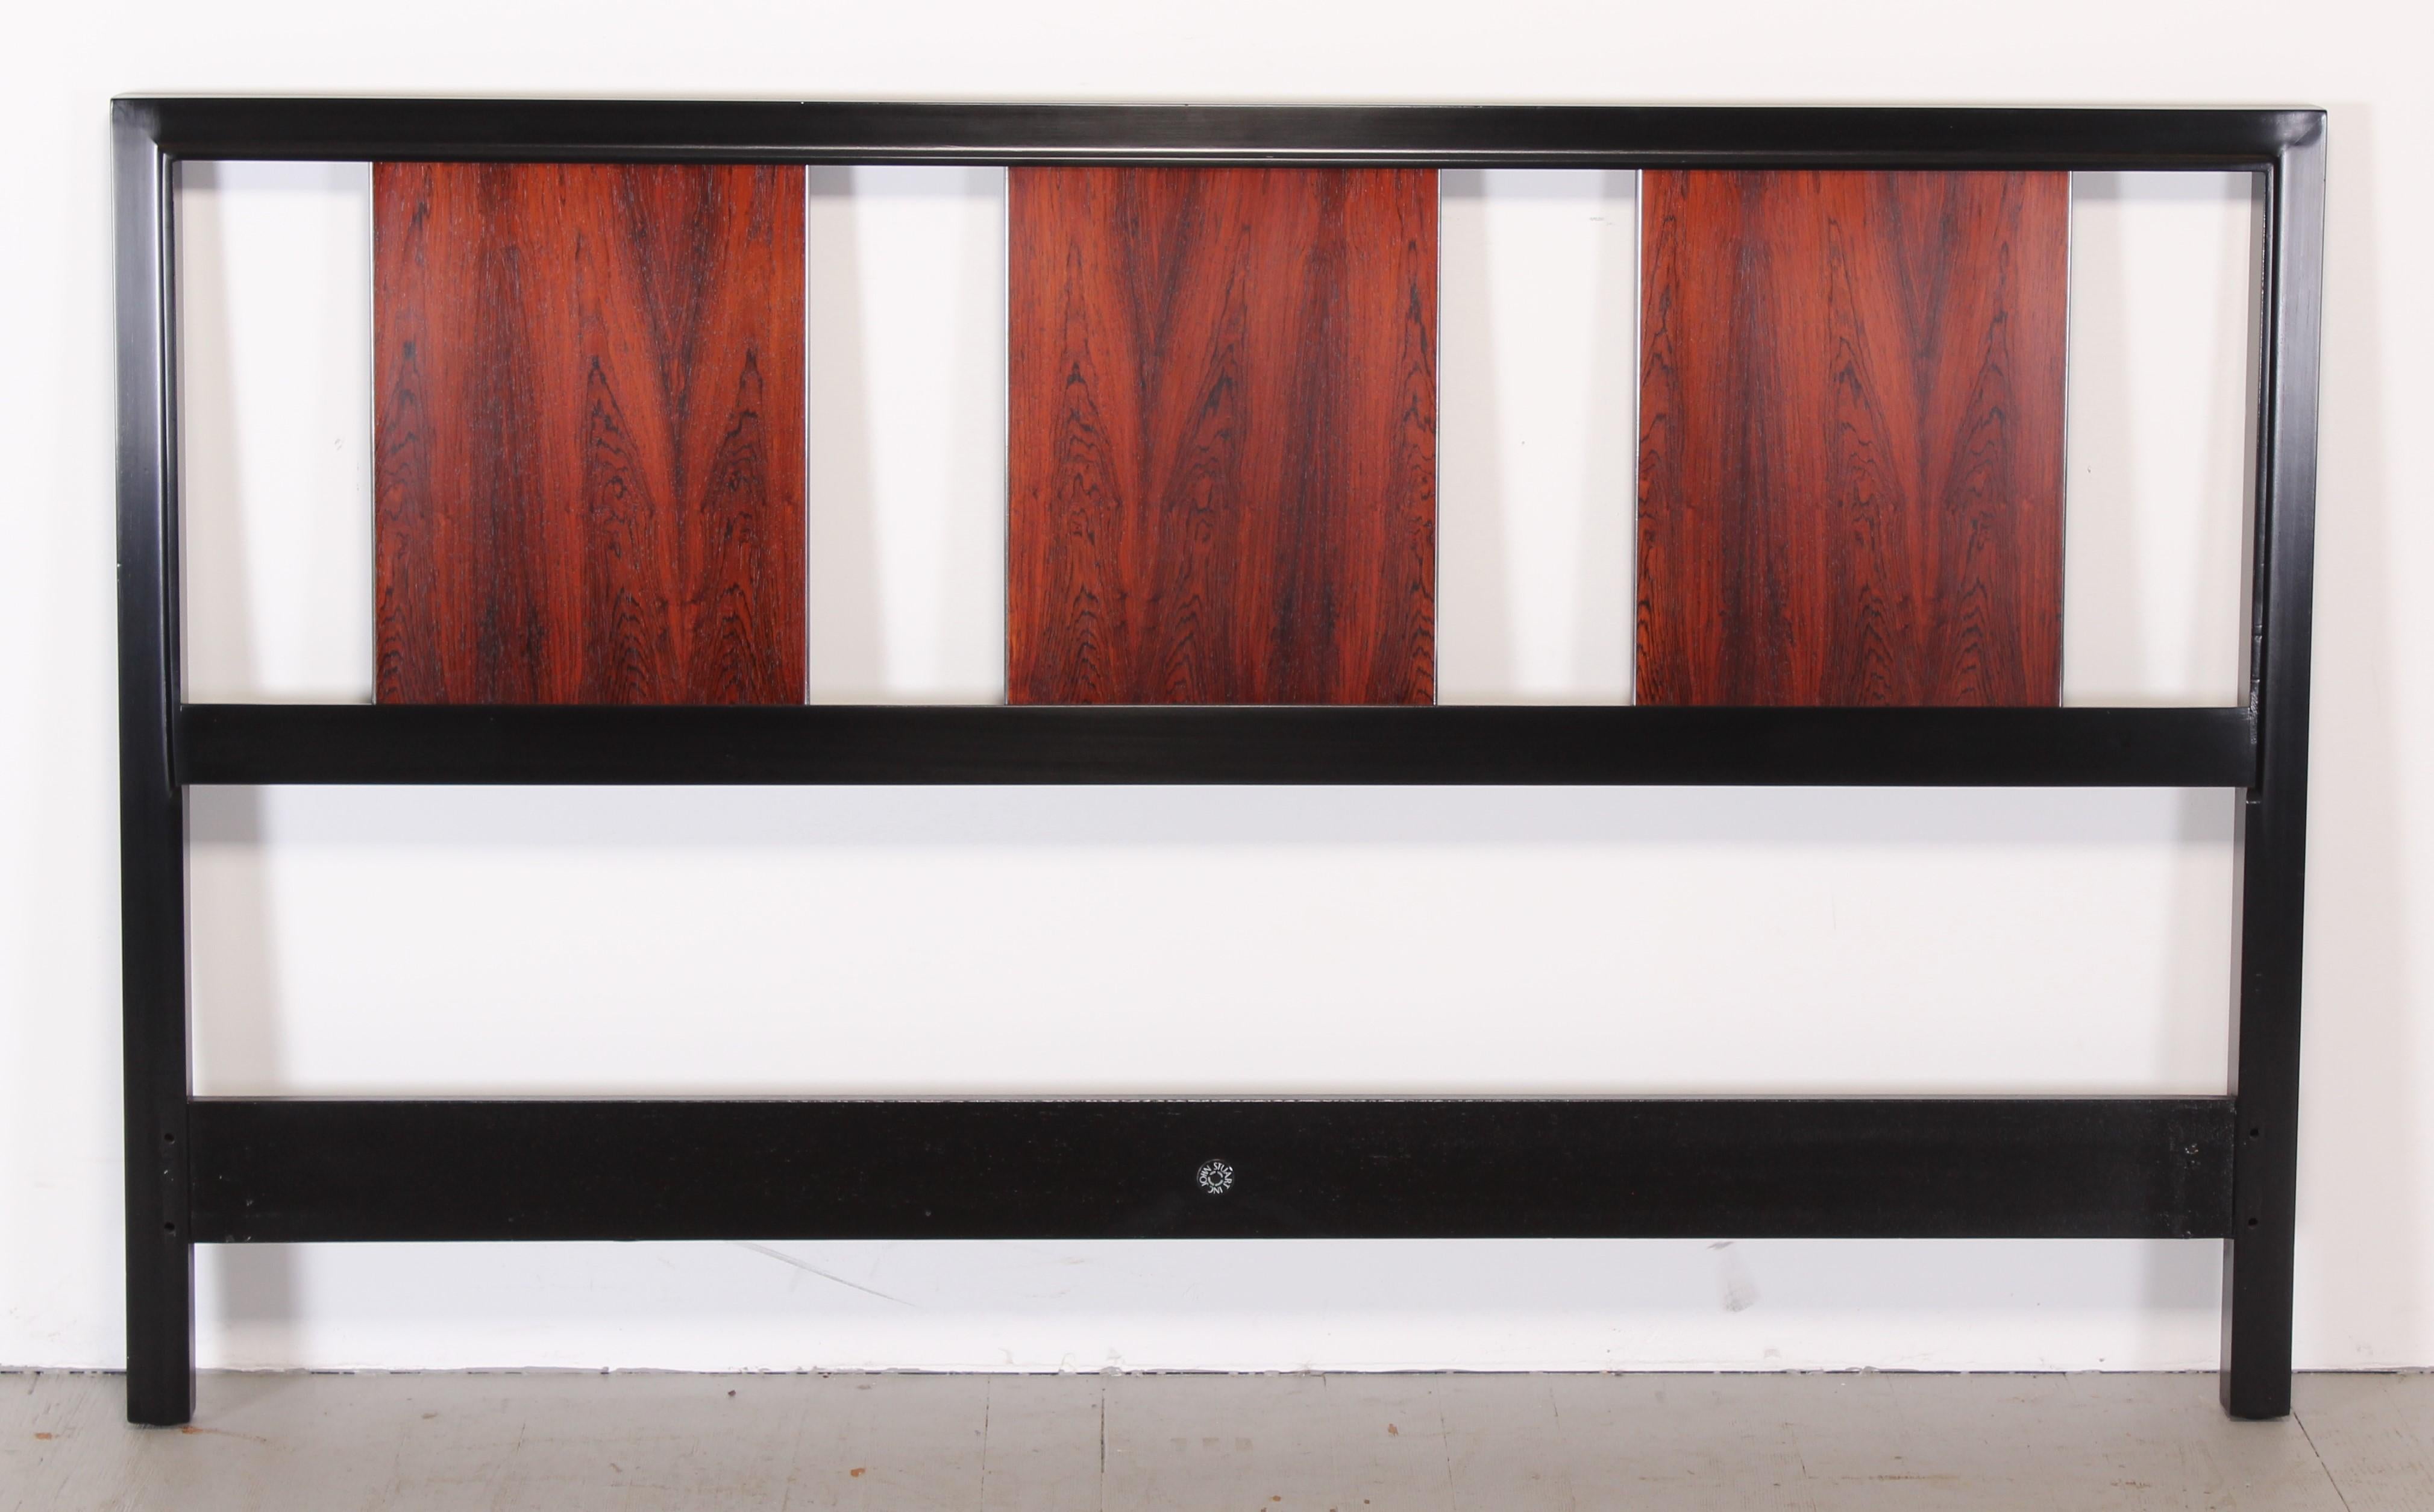 An exquisite Robert Baron for Glenn of California rosewood headboard, 1970. Black oak full-size frame with rosewood panels and polished aluminum accents. Beautifully restored finish. Only the headboard is available. The other bedroom pieces are no